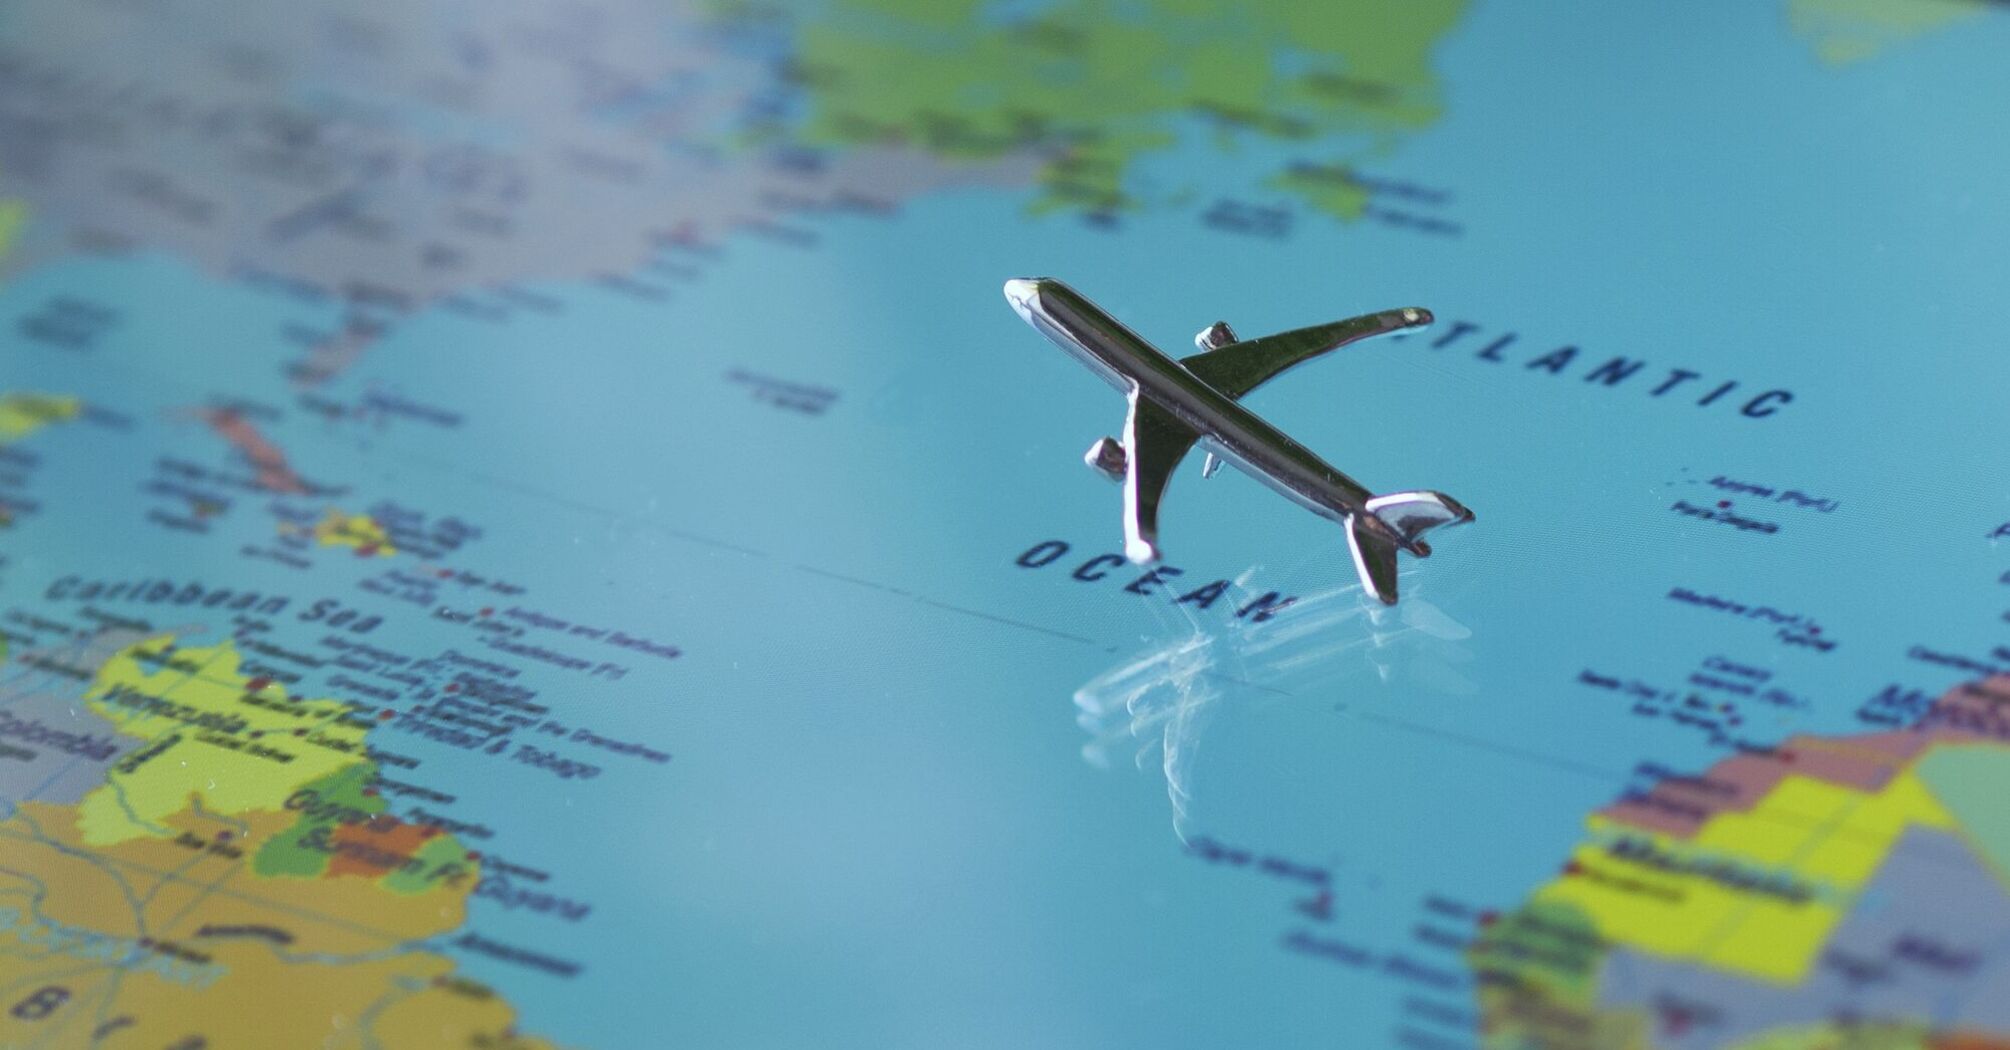 A small toy airplane positioned on a world map over the Atlantic Ocean area